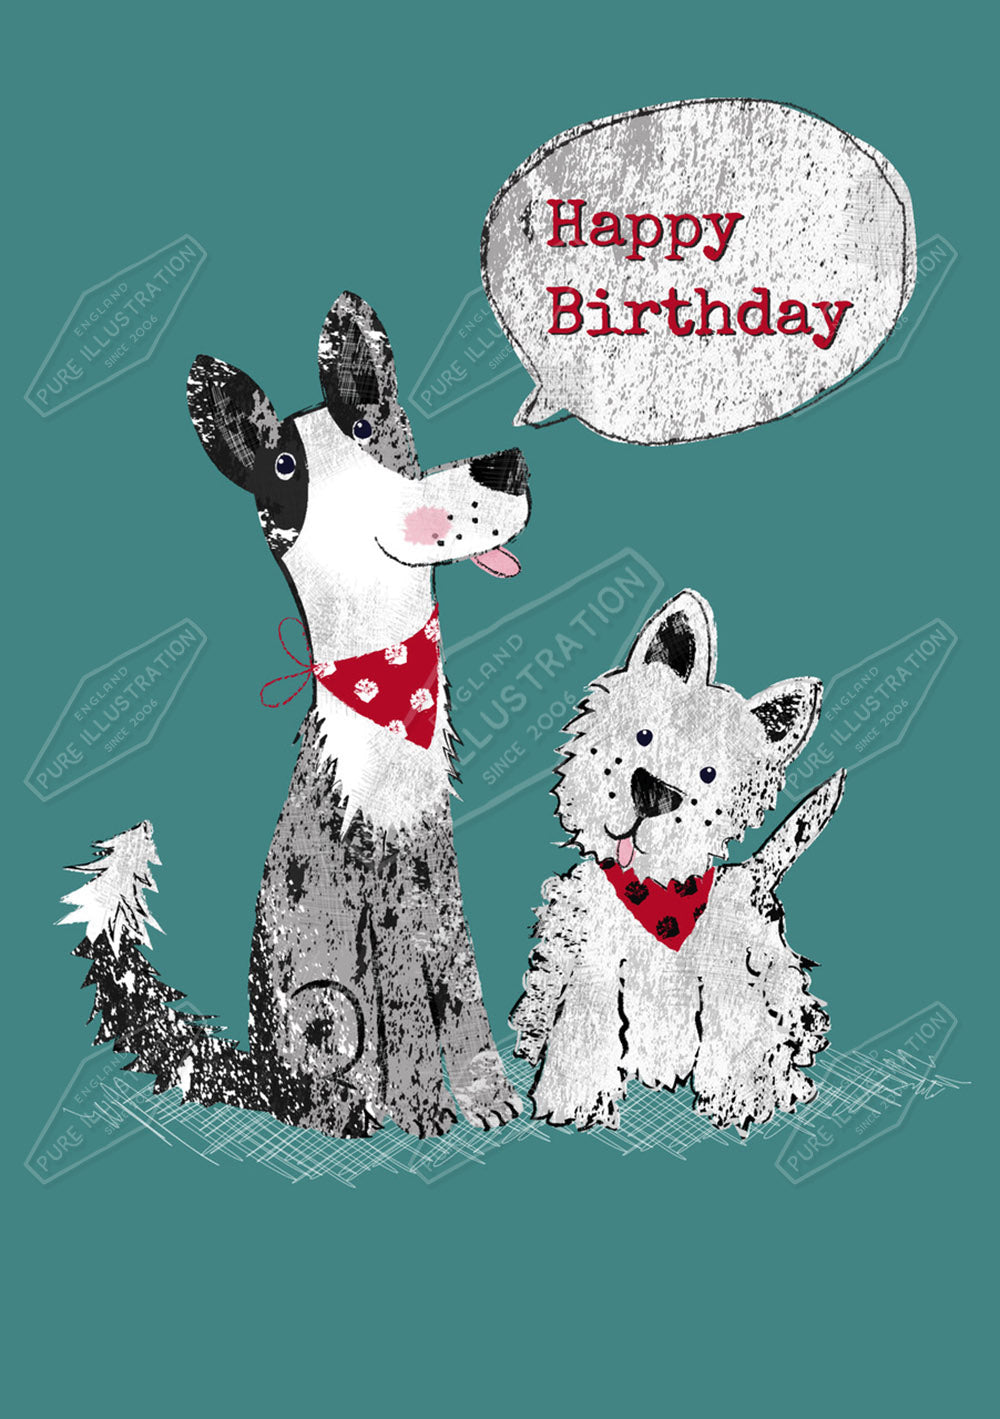 00032731KSP- Kerry Spurling is represented by Pure Art Licensing Agency - Birthday Greeting Card Design